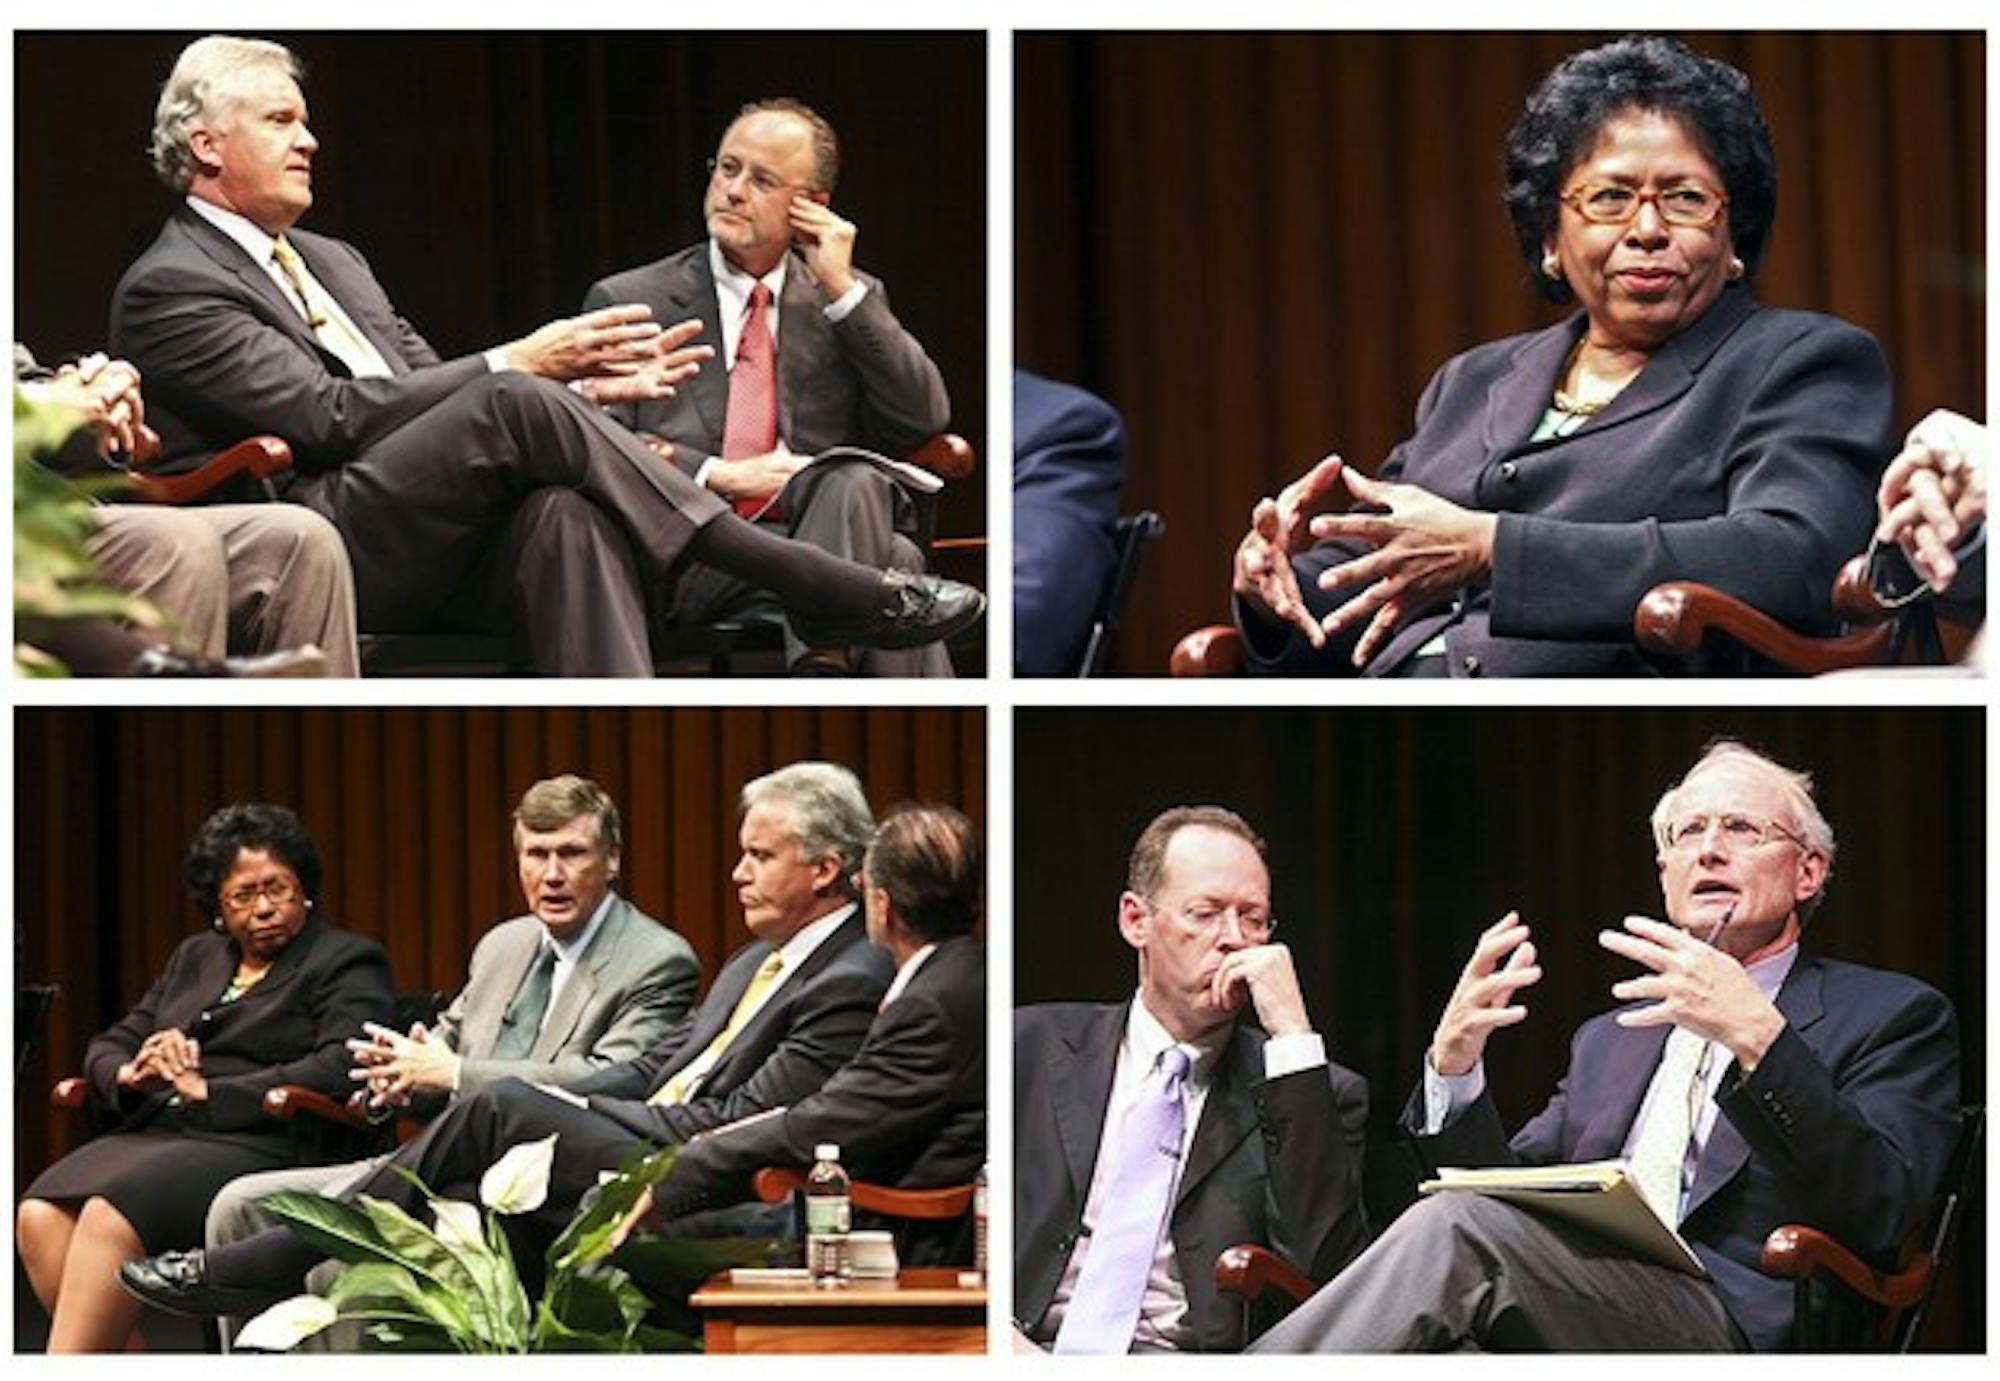 Leaders in business and academia took part in a panel, 